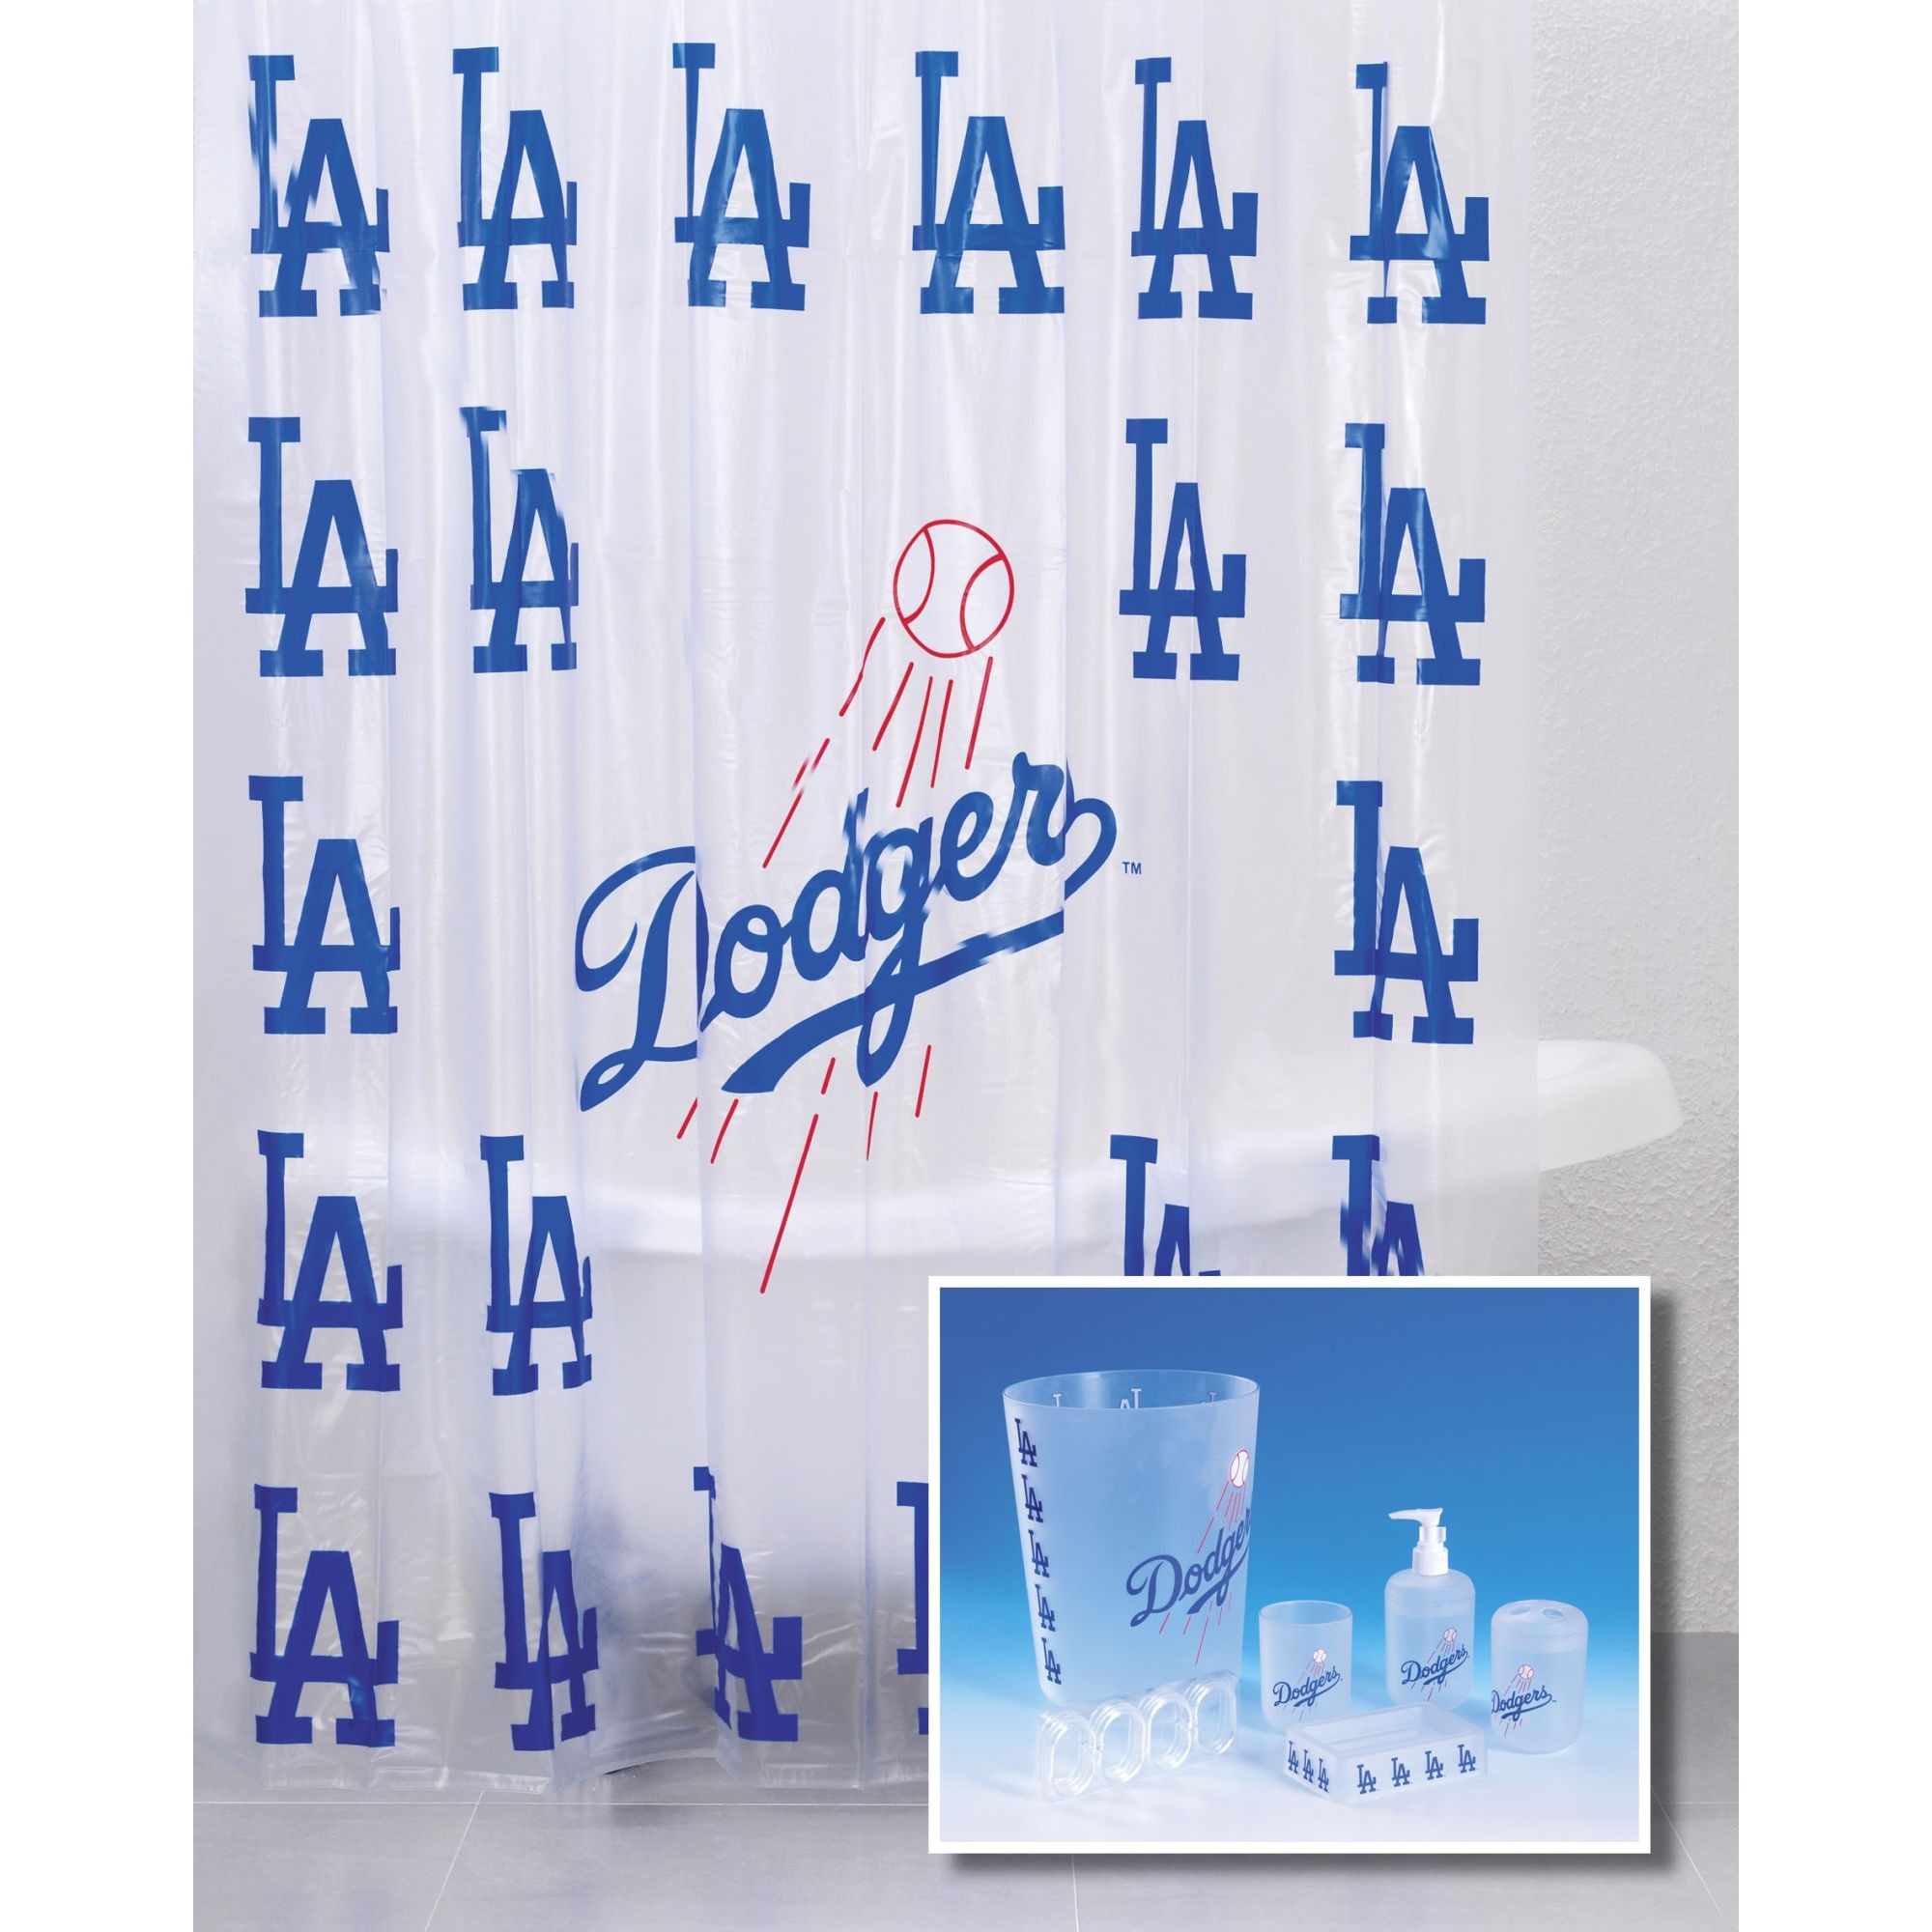 Gallery For La Dodgers